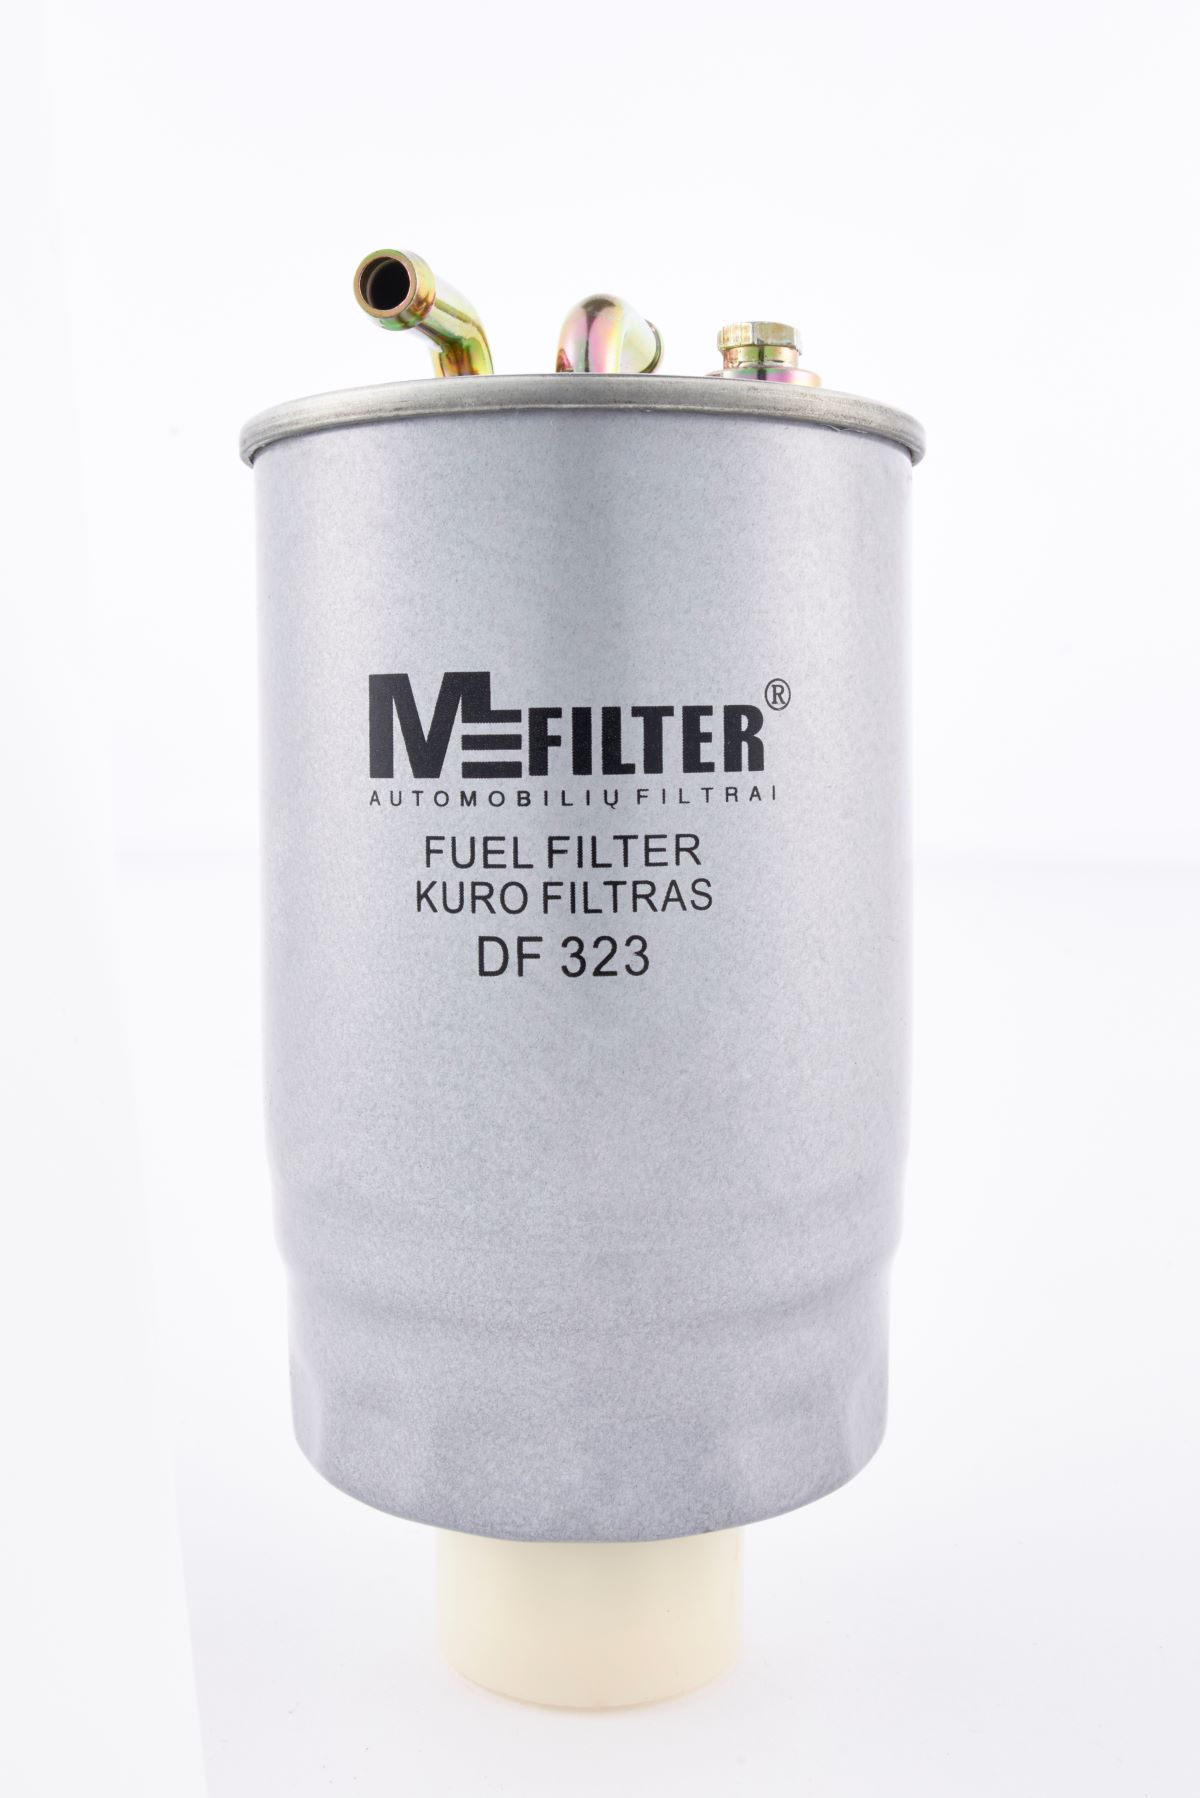 Fuel filters MFilter - Automotive filter production